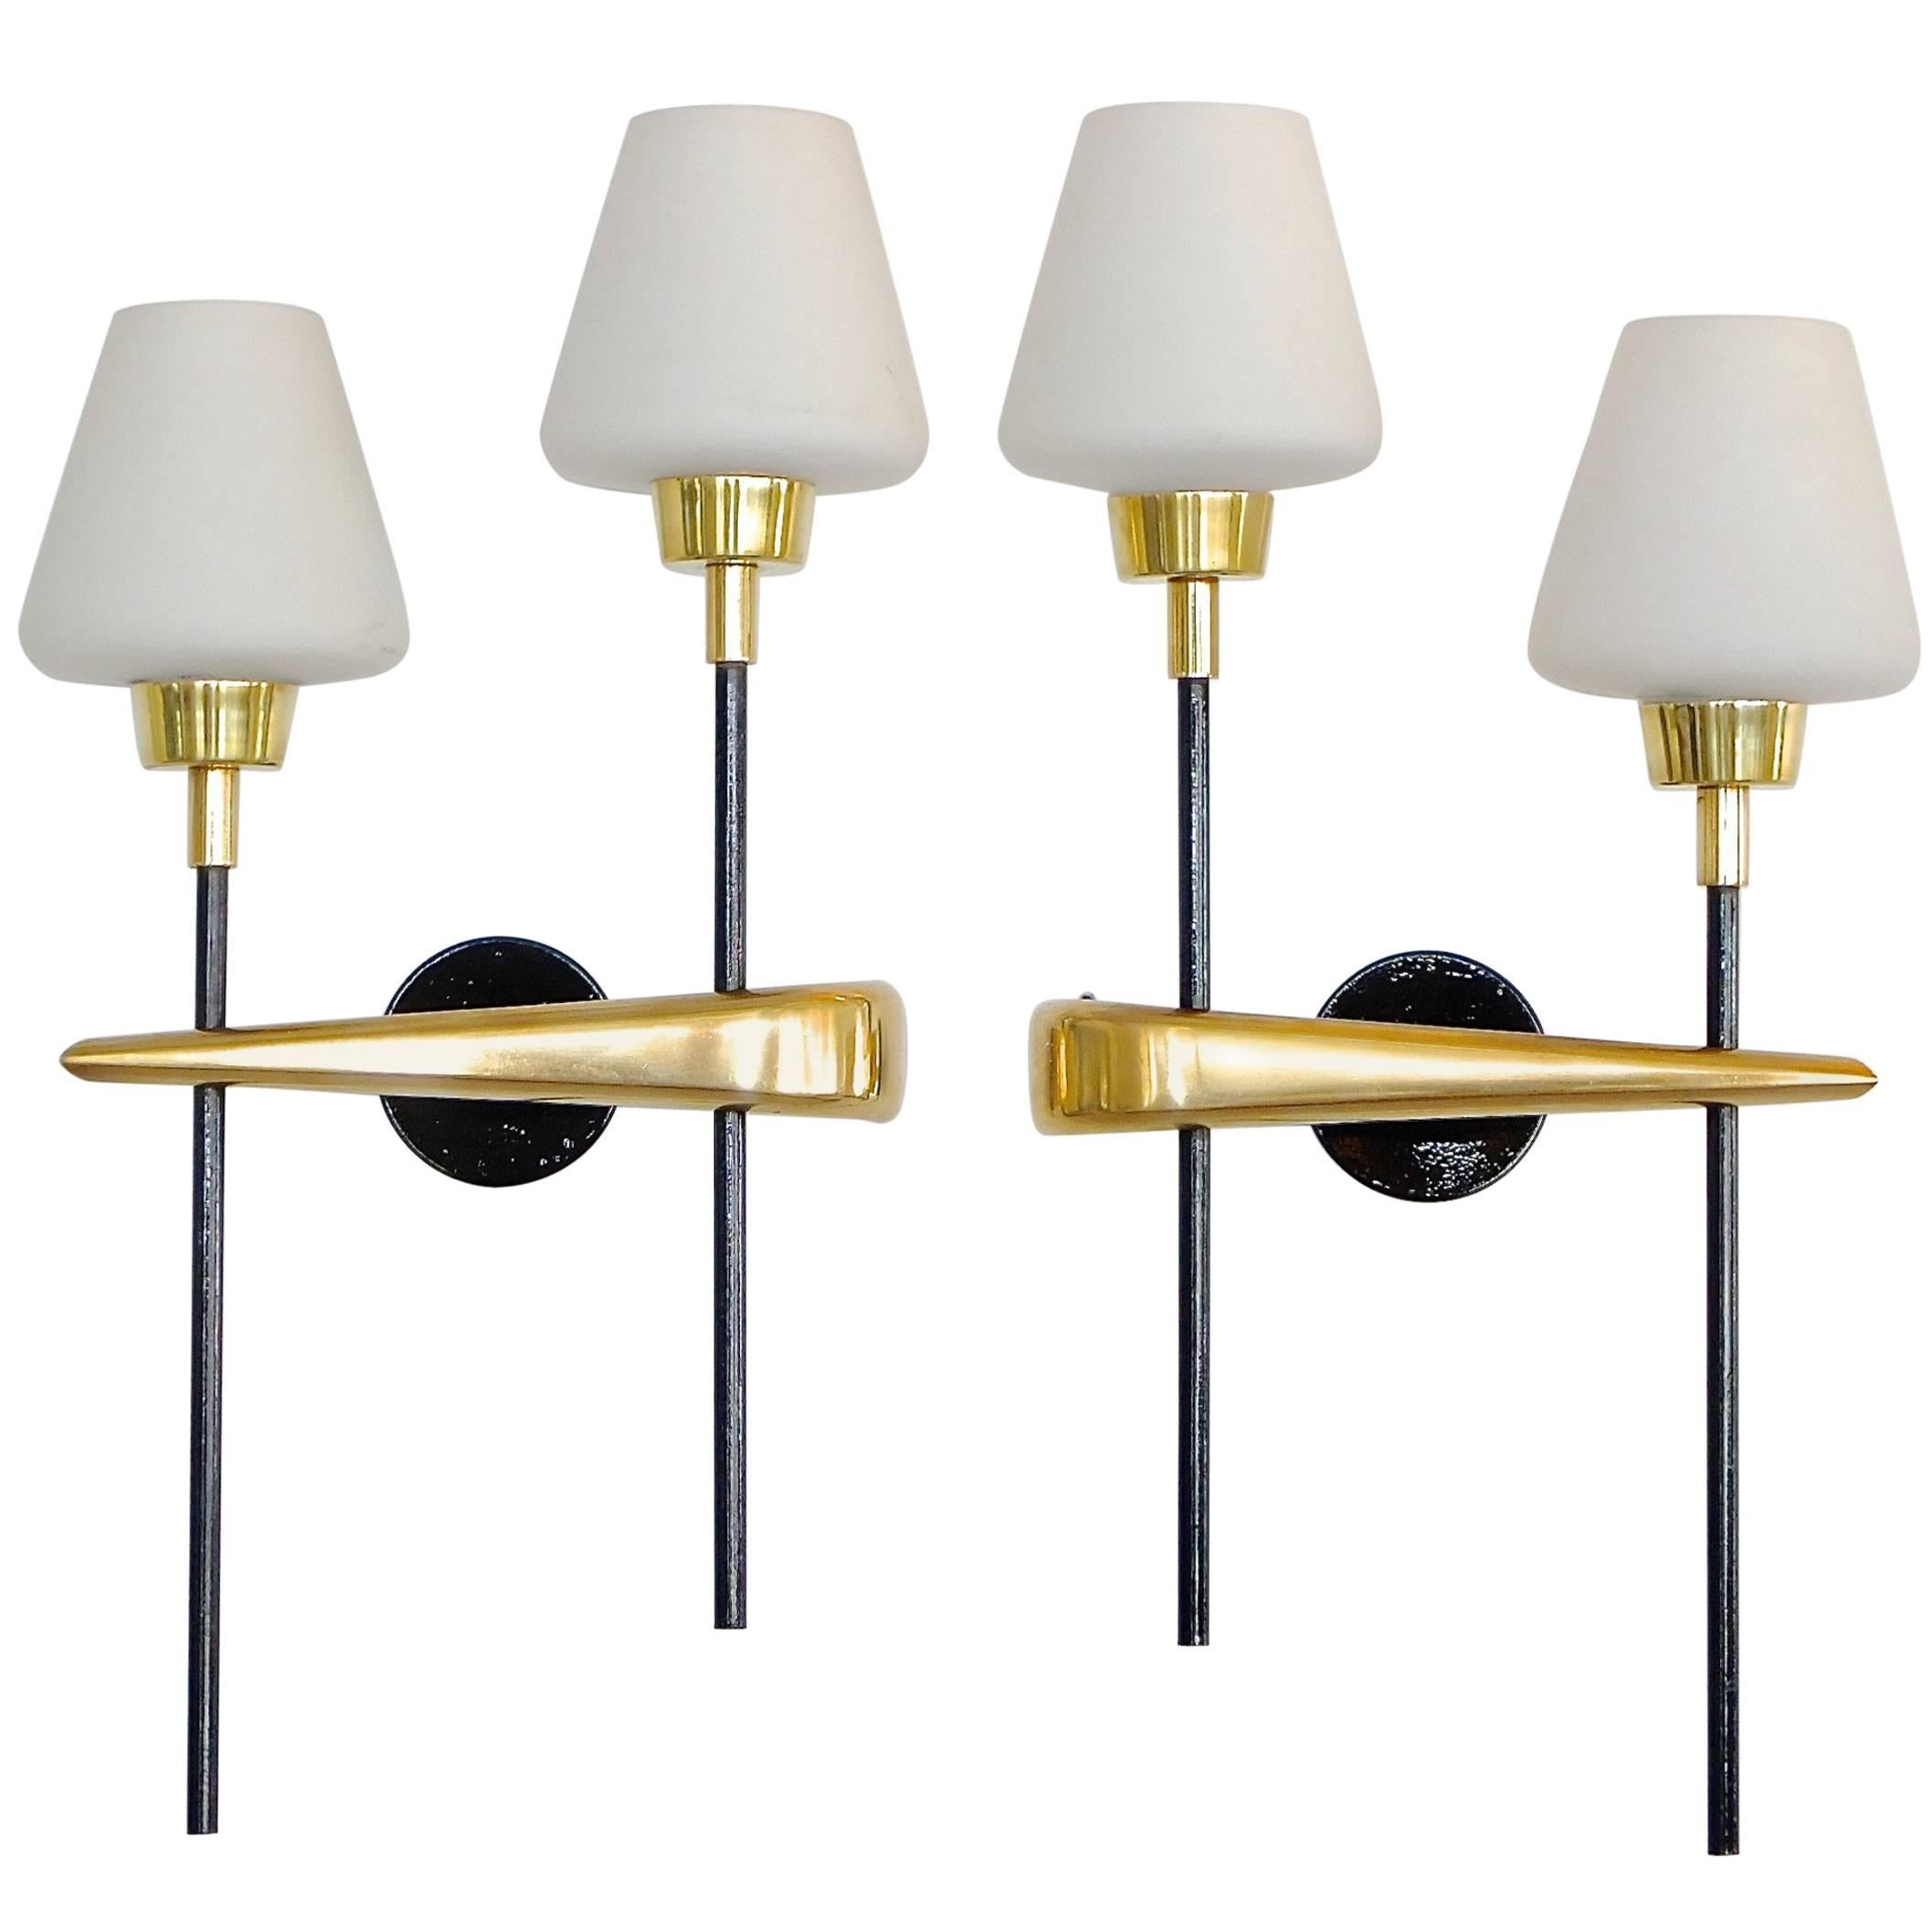 Pair of Brass and Iron Two-Light Sconces by Arlus